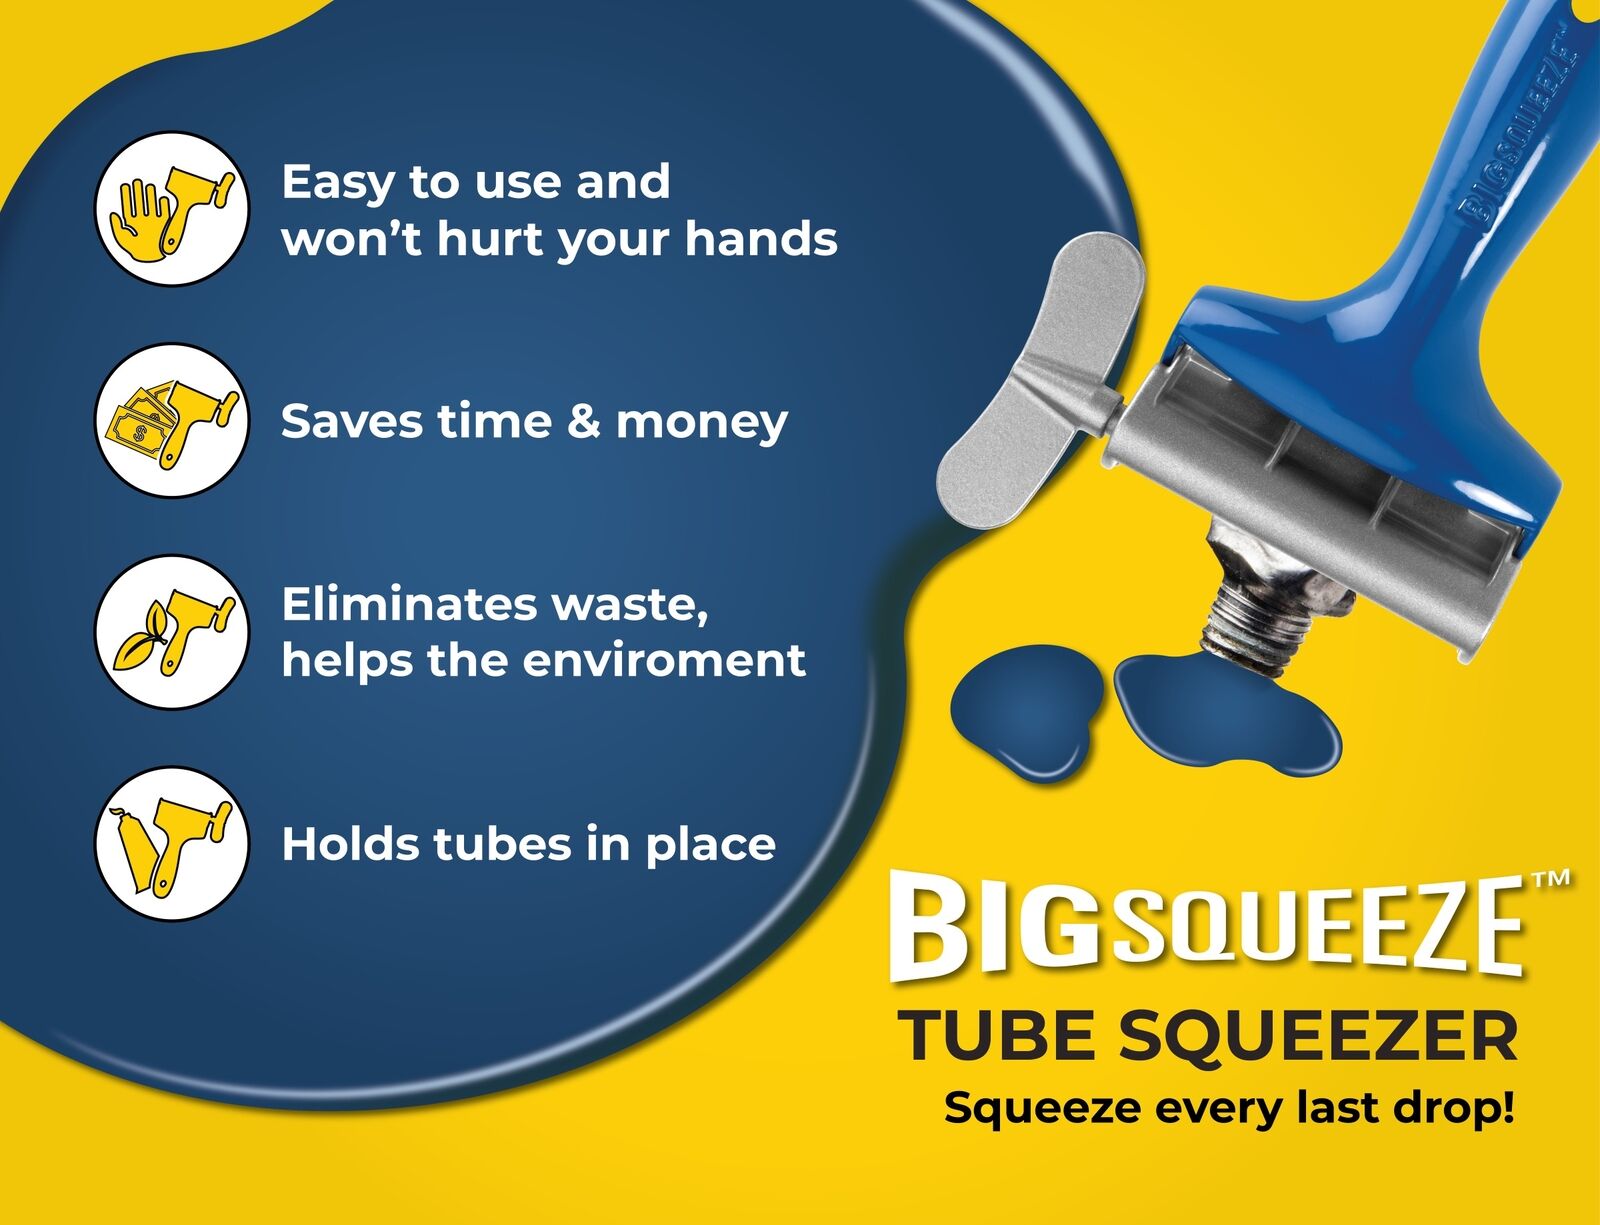 BIG SQUEEZE AUSTRALIA  / / / / / / / / / / /> /> Product Tube Squeezer get all the Liquid and Product out the Tube = SAVE Money and the Environment